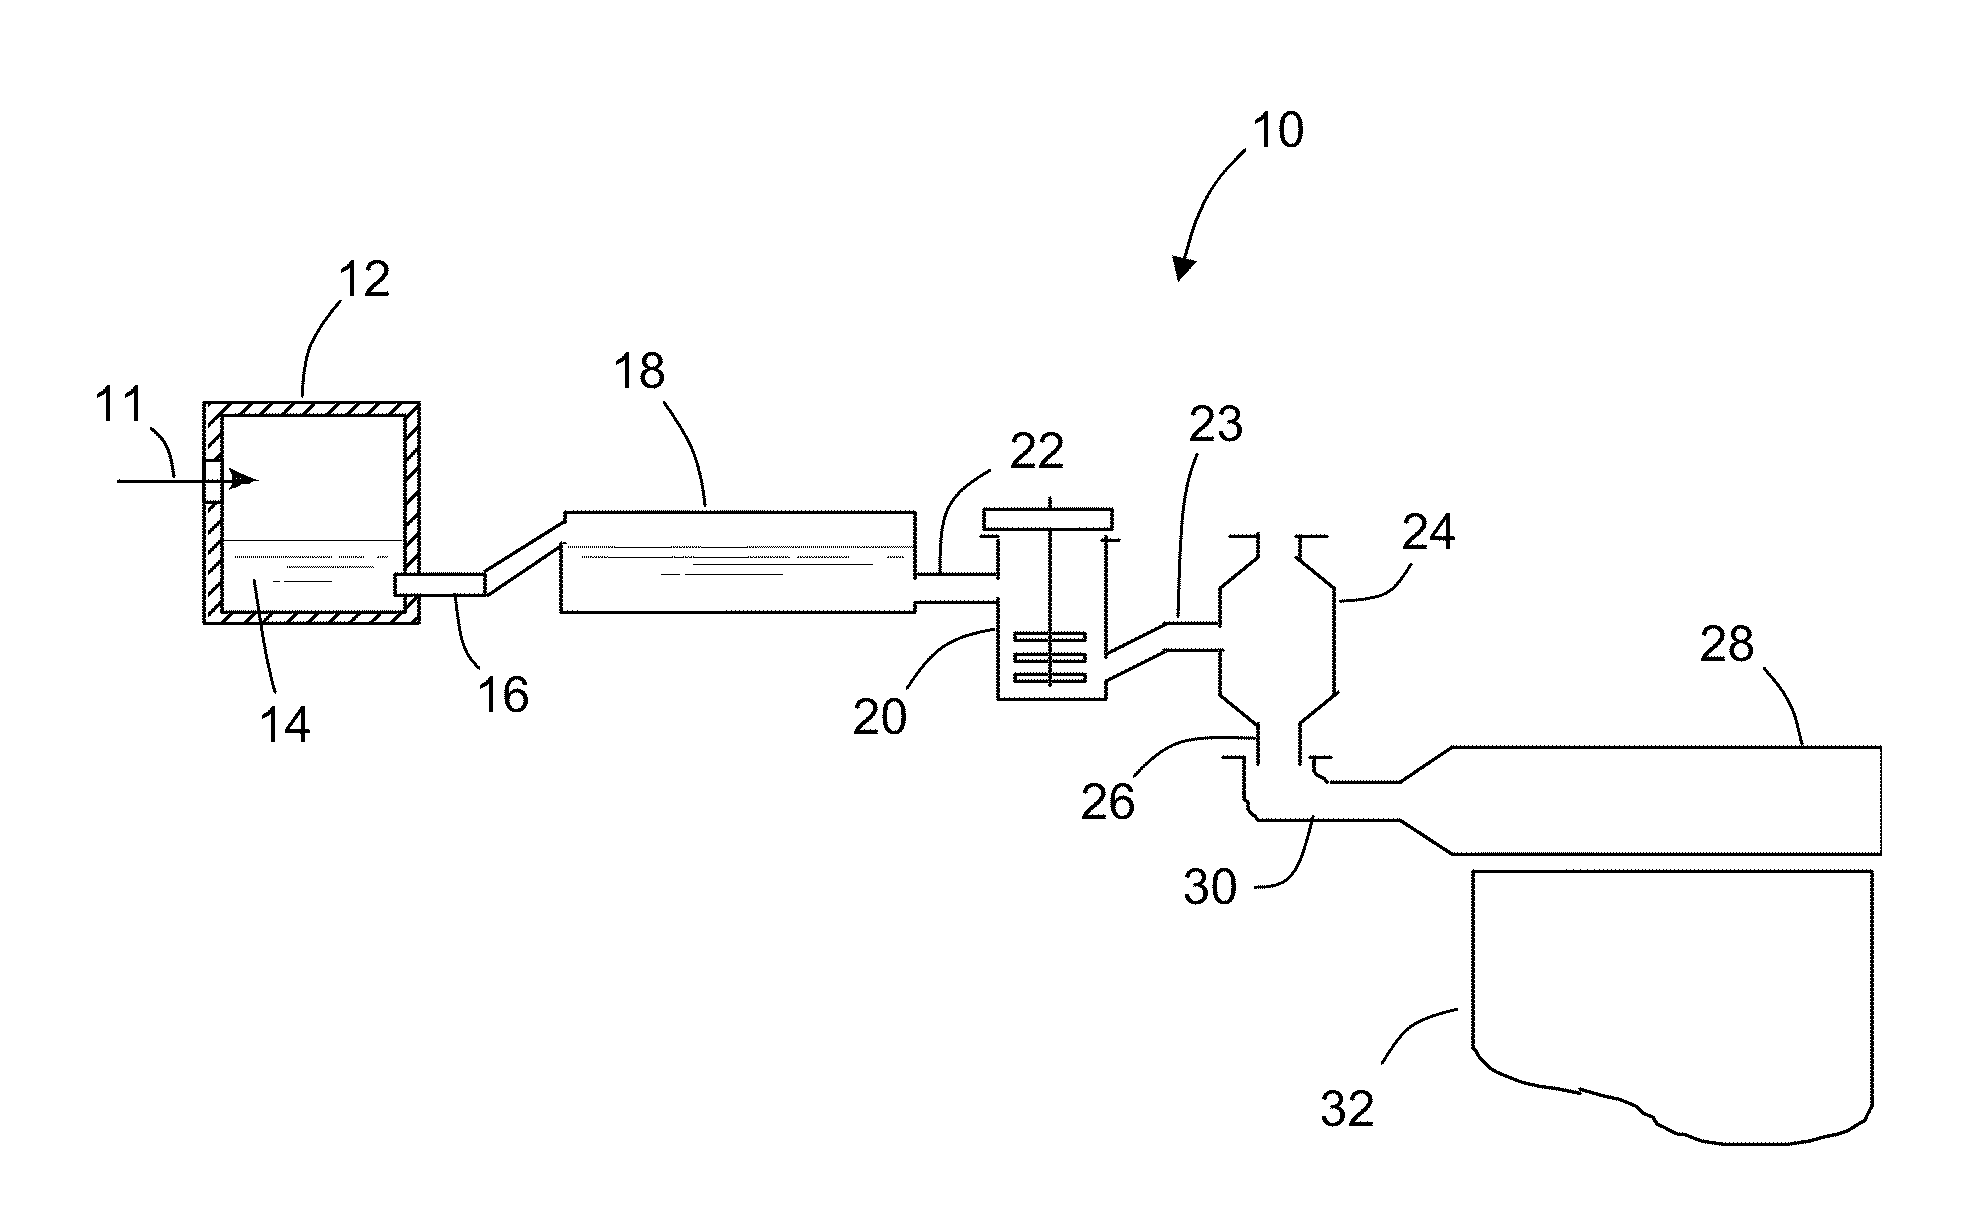 Apparatus for use in direct resistance heating of platinum-containing vessels